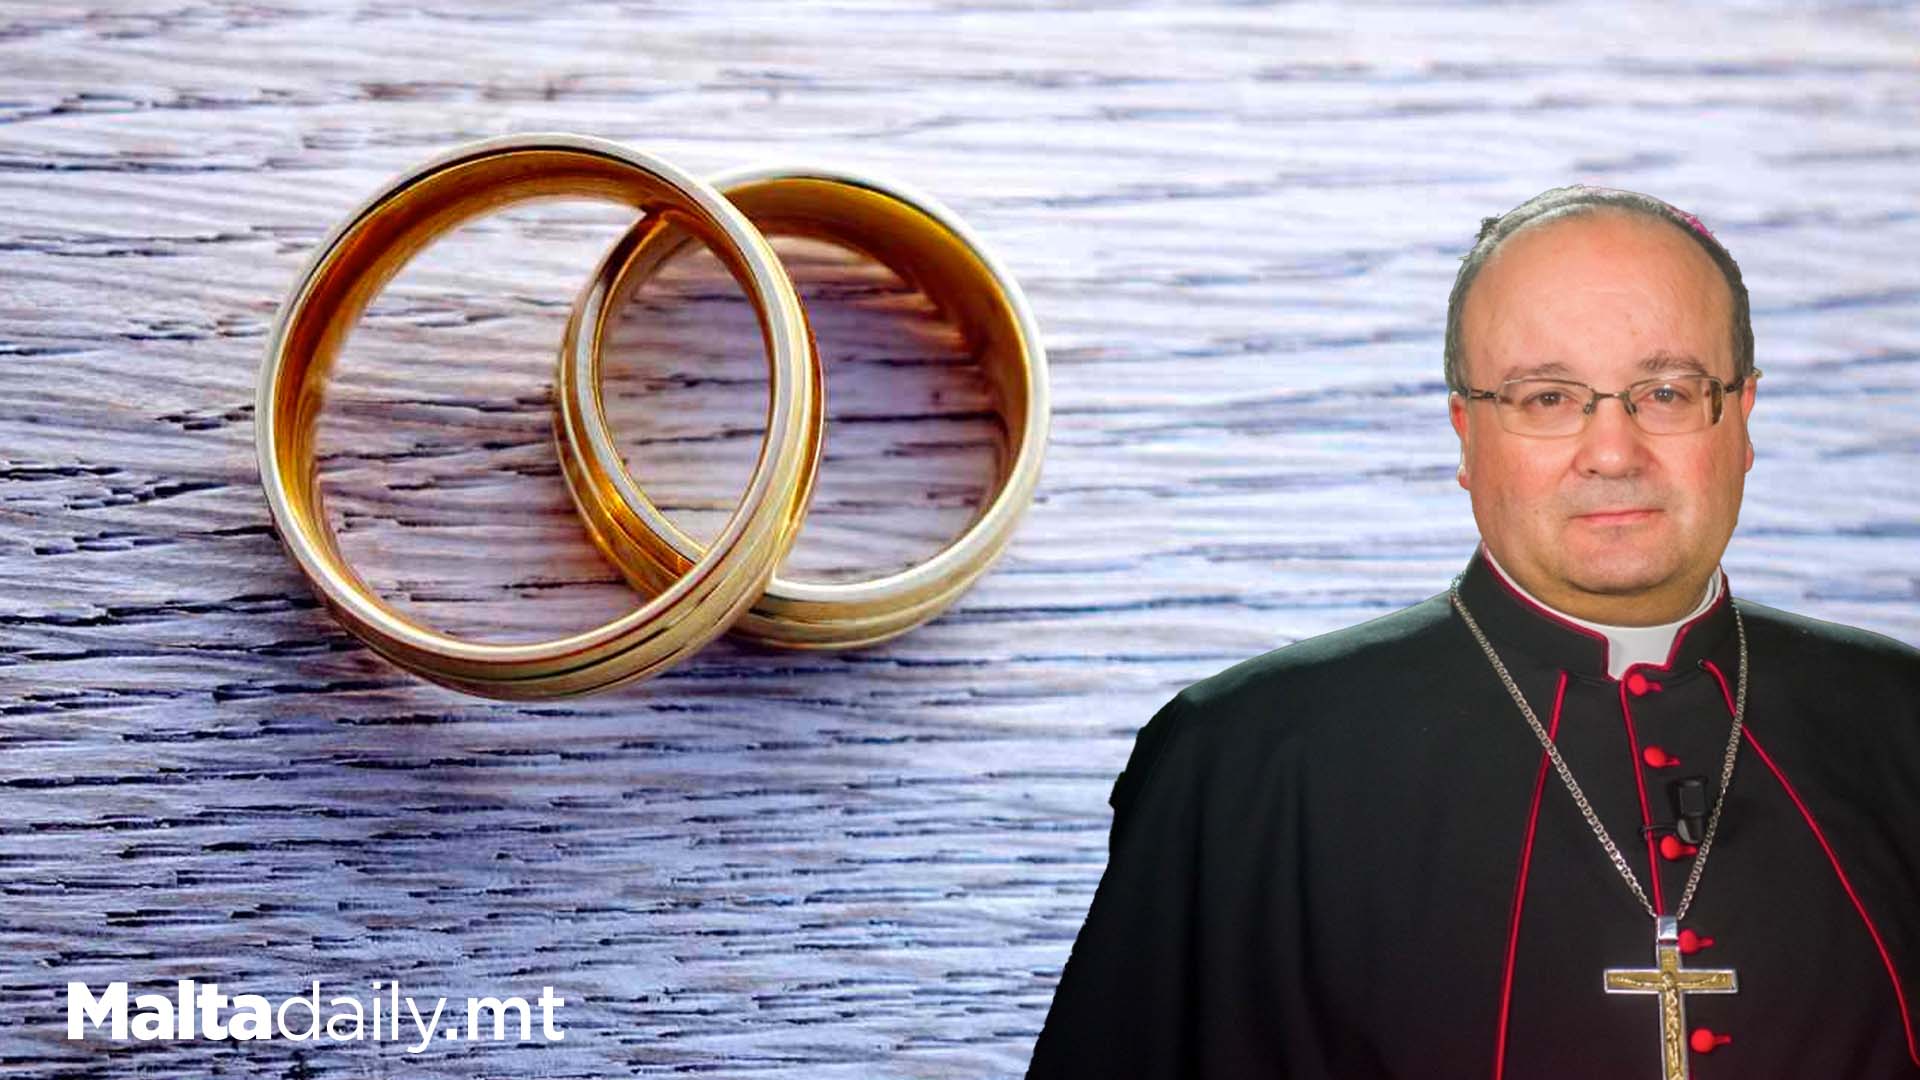 People Mostly Agree Priests Should Be Allowed Marriage